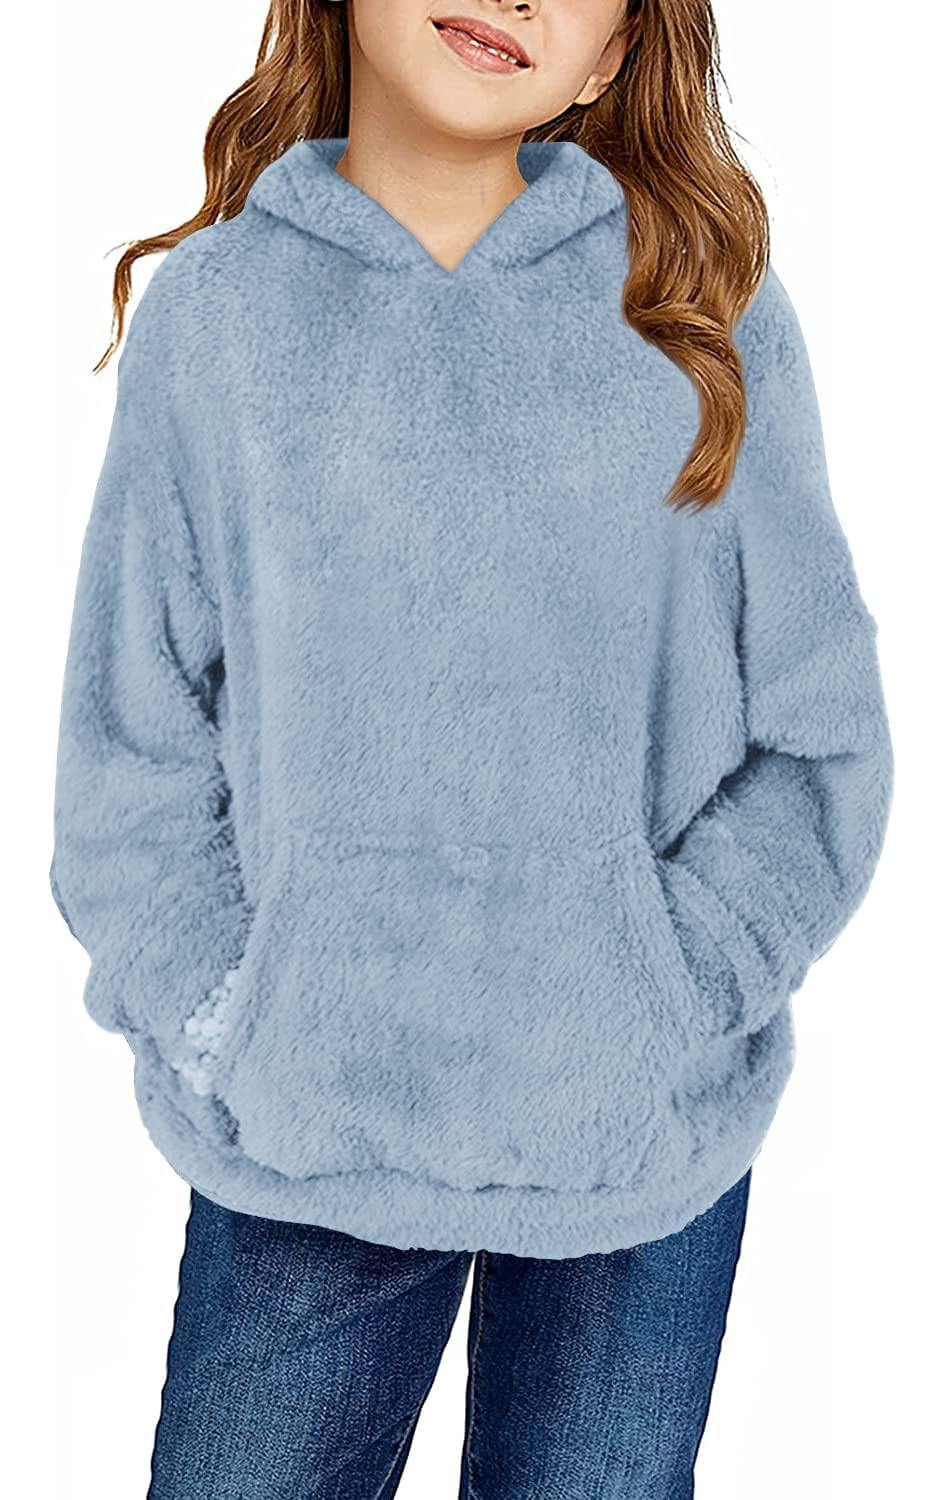 Yyeselk Womens Fleece Tunic Pullover Long Sleeves Fuzzy Sweatshirts  Oversized Fluffy Coat with Pockets Trendy Pure Color Hoodies Blue S 